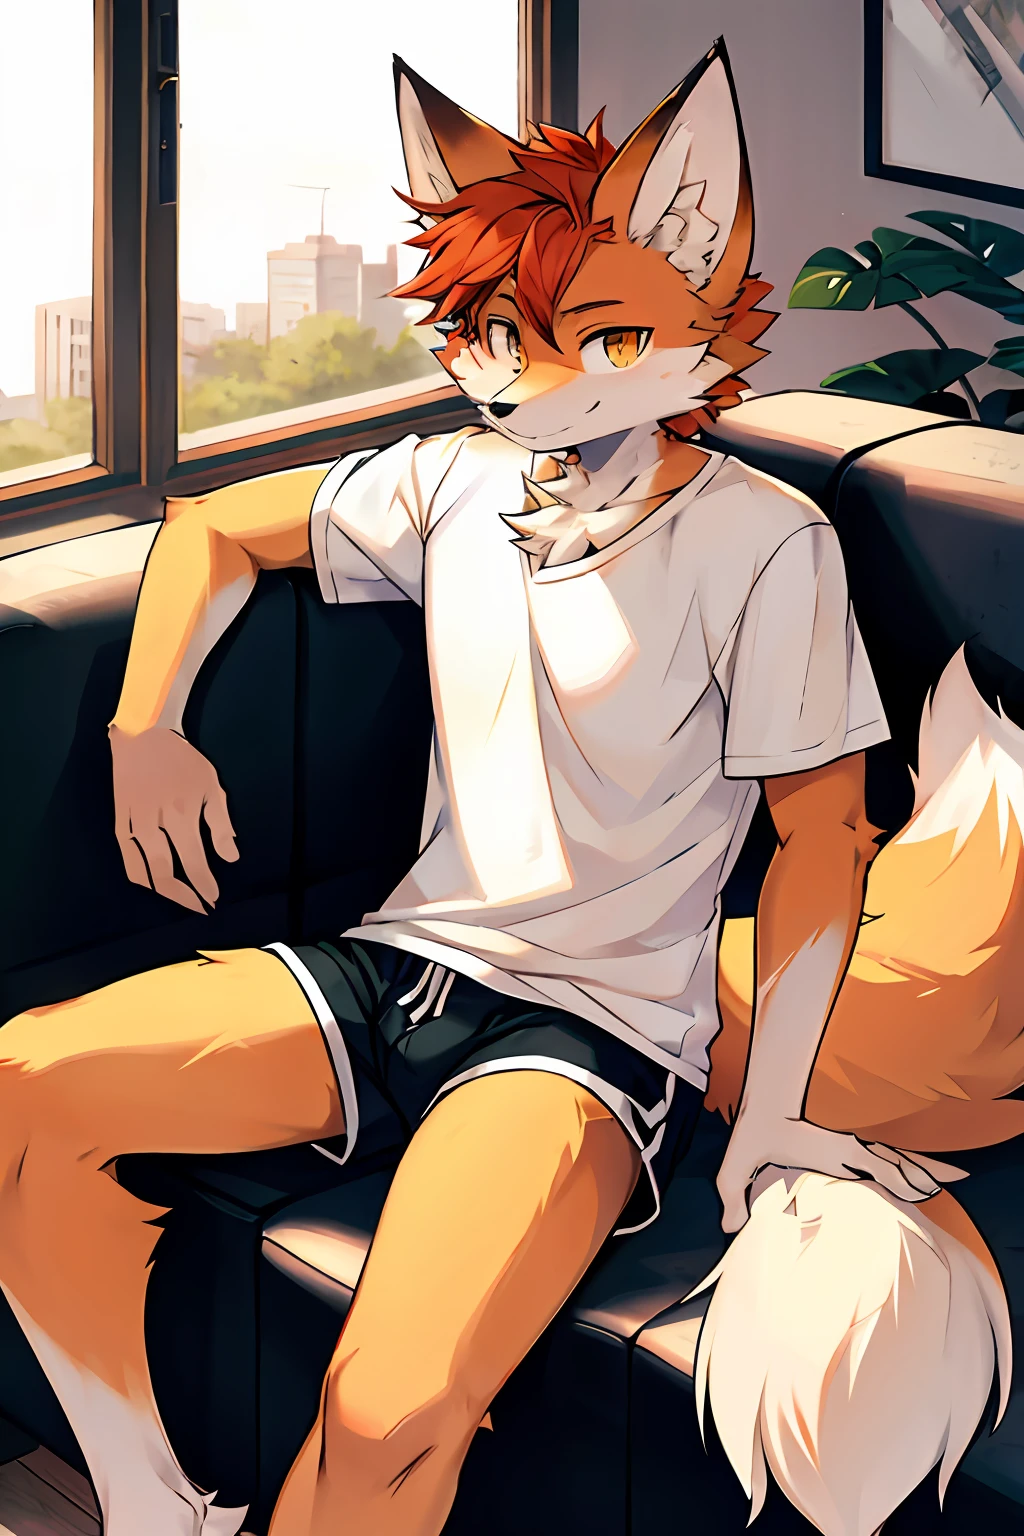 (Fox, furry, anthropomorphic), Male, siting on couch, inside, Livingroom, wearing shorts, wearing shirt, Furry art, Fur on arms, big Floofy tail, fur on legs, (Fur covering whole body, Best quality, human like body figure), looking at viewer